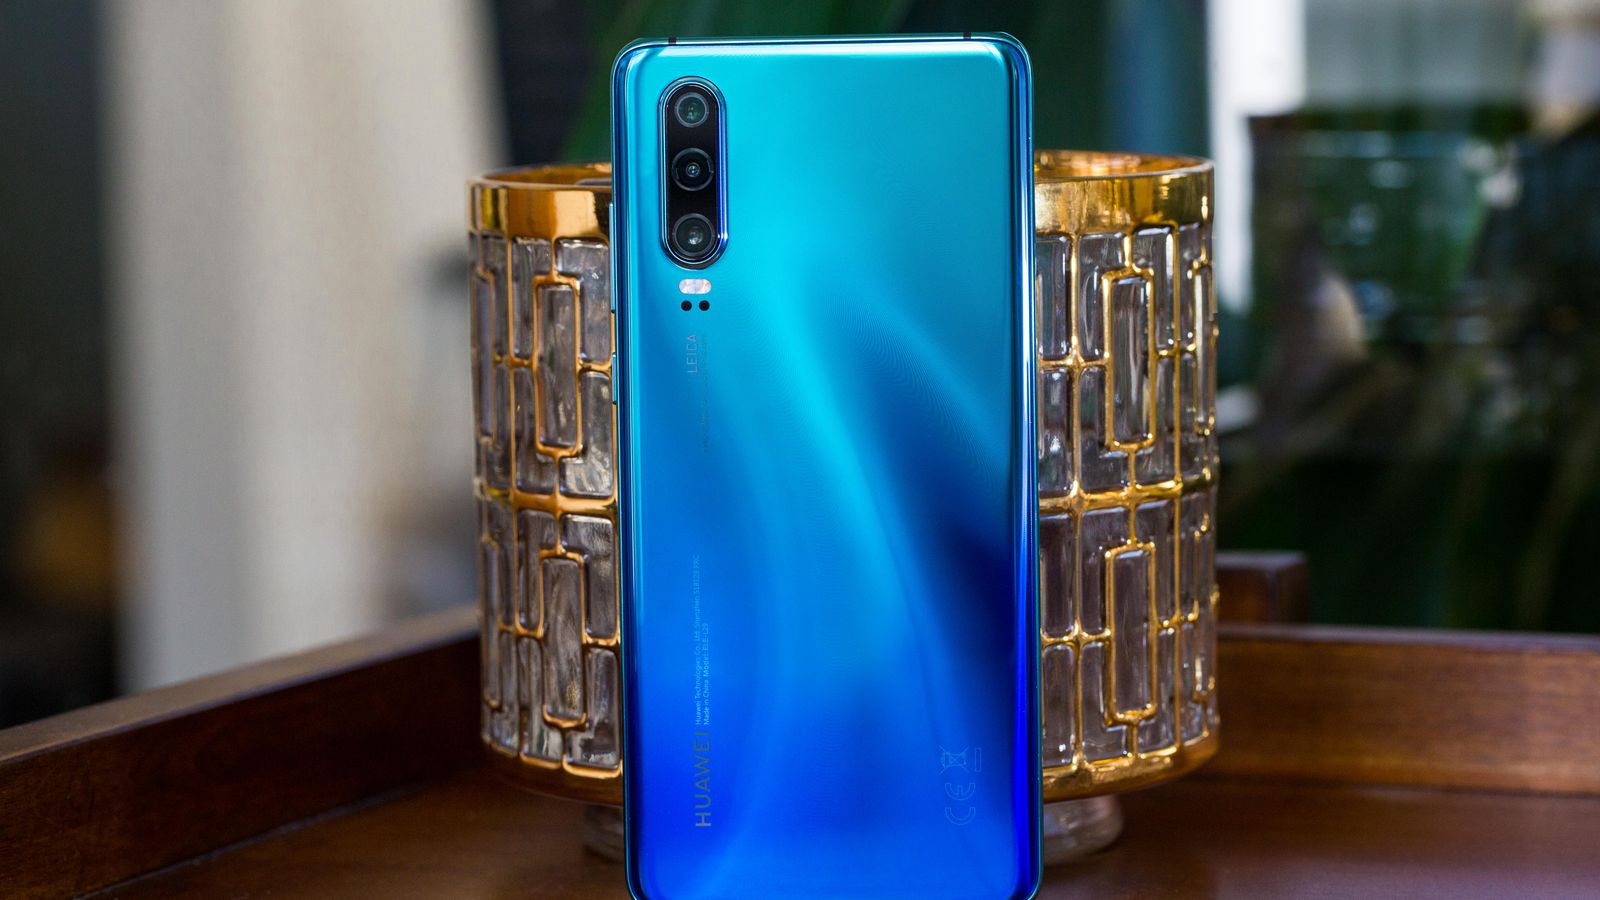 HUAWEI P30 vs. Galaxy S10 vs. Pixel 3: Cameras, battery and all the specs
        